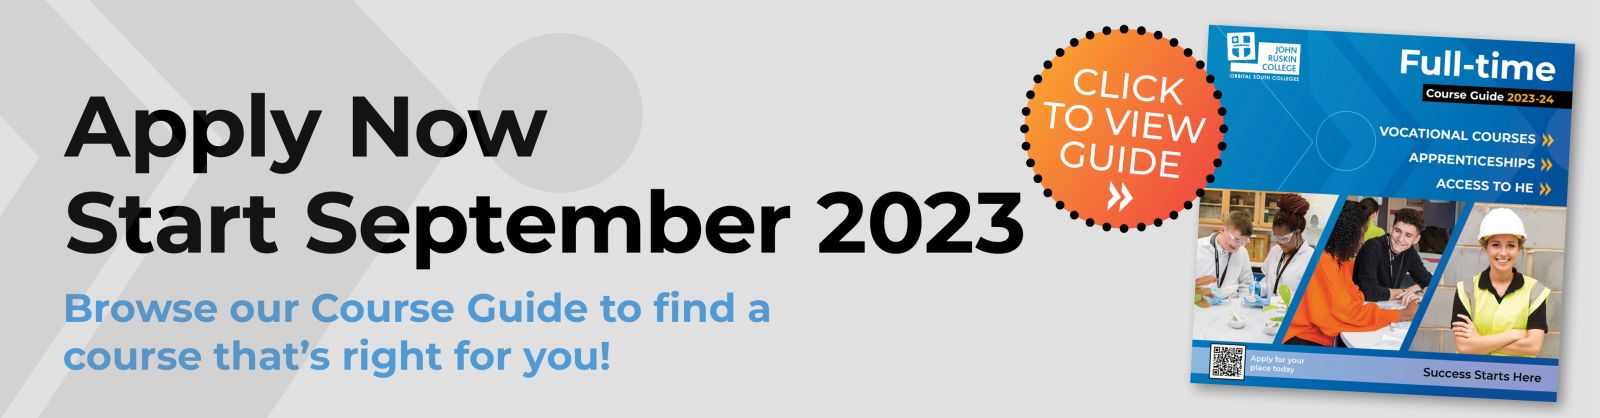 Apply now for a full time course for september 2023